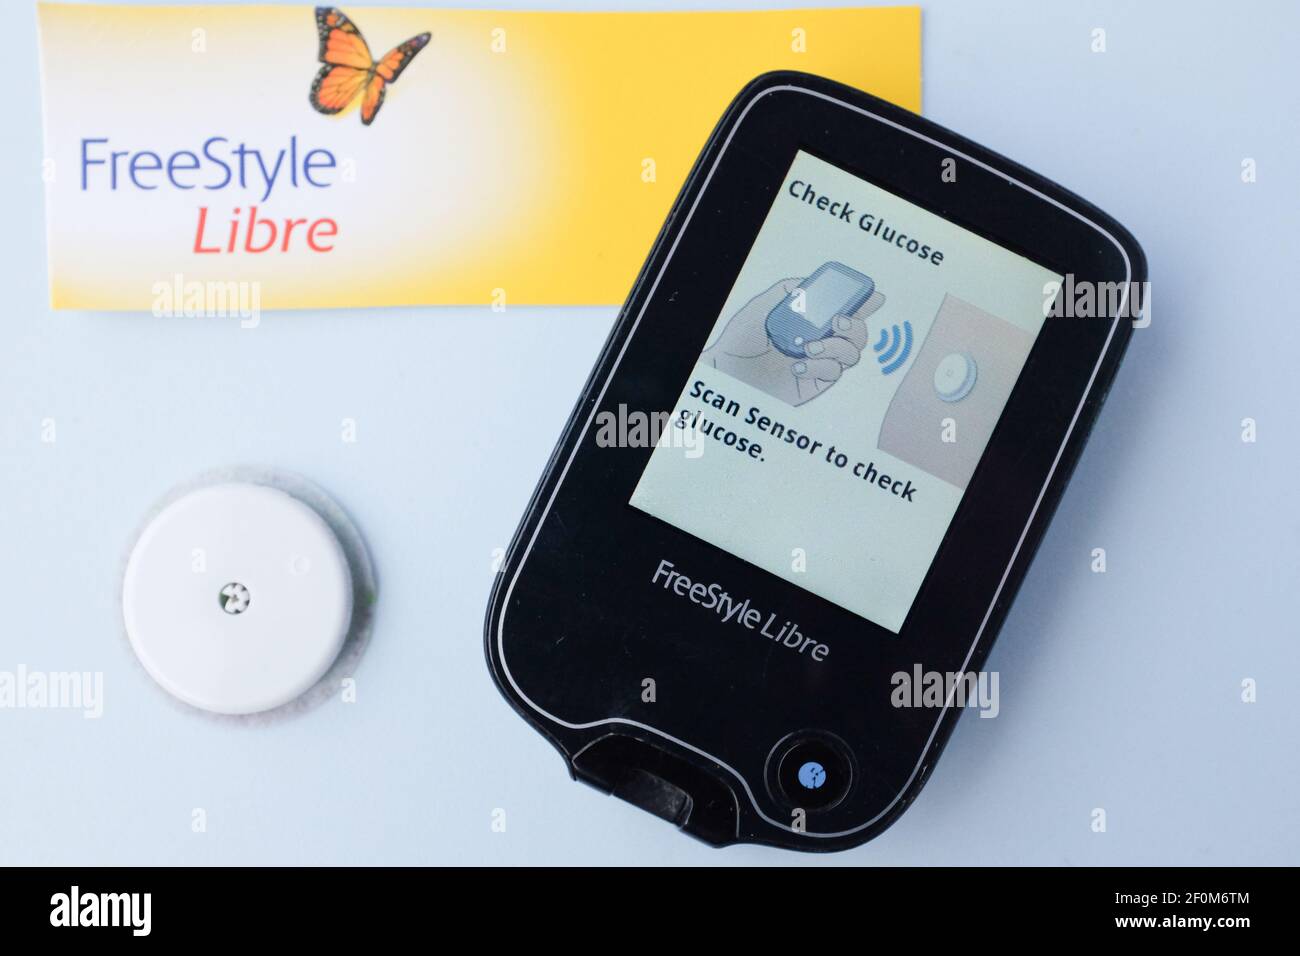 A FreeStyle Libre Flash Glucose sensor and reader. The device usually worn on the upper arm, helps people with Type 1 diabetes monitor their blood sugar levels. Each sensor last 14 days and costs around £50. The technology is available on the NHS in some areas (depending on local approval). Photo credit should read: Katie Collins/EMPICS/Alamy Stock Photo